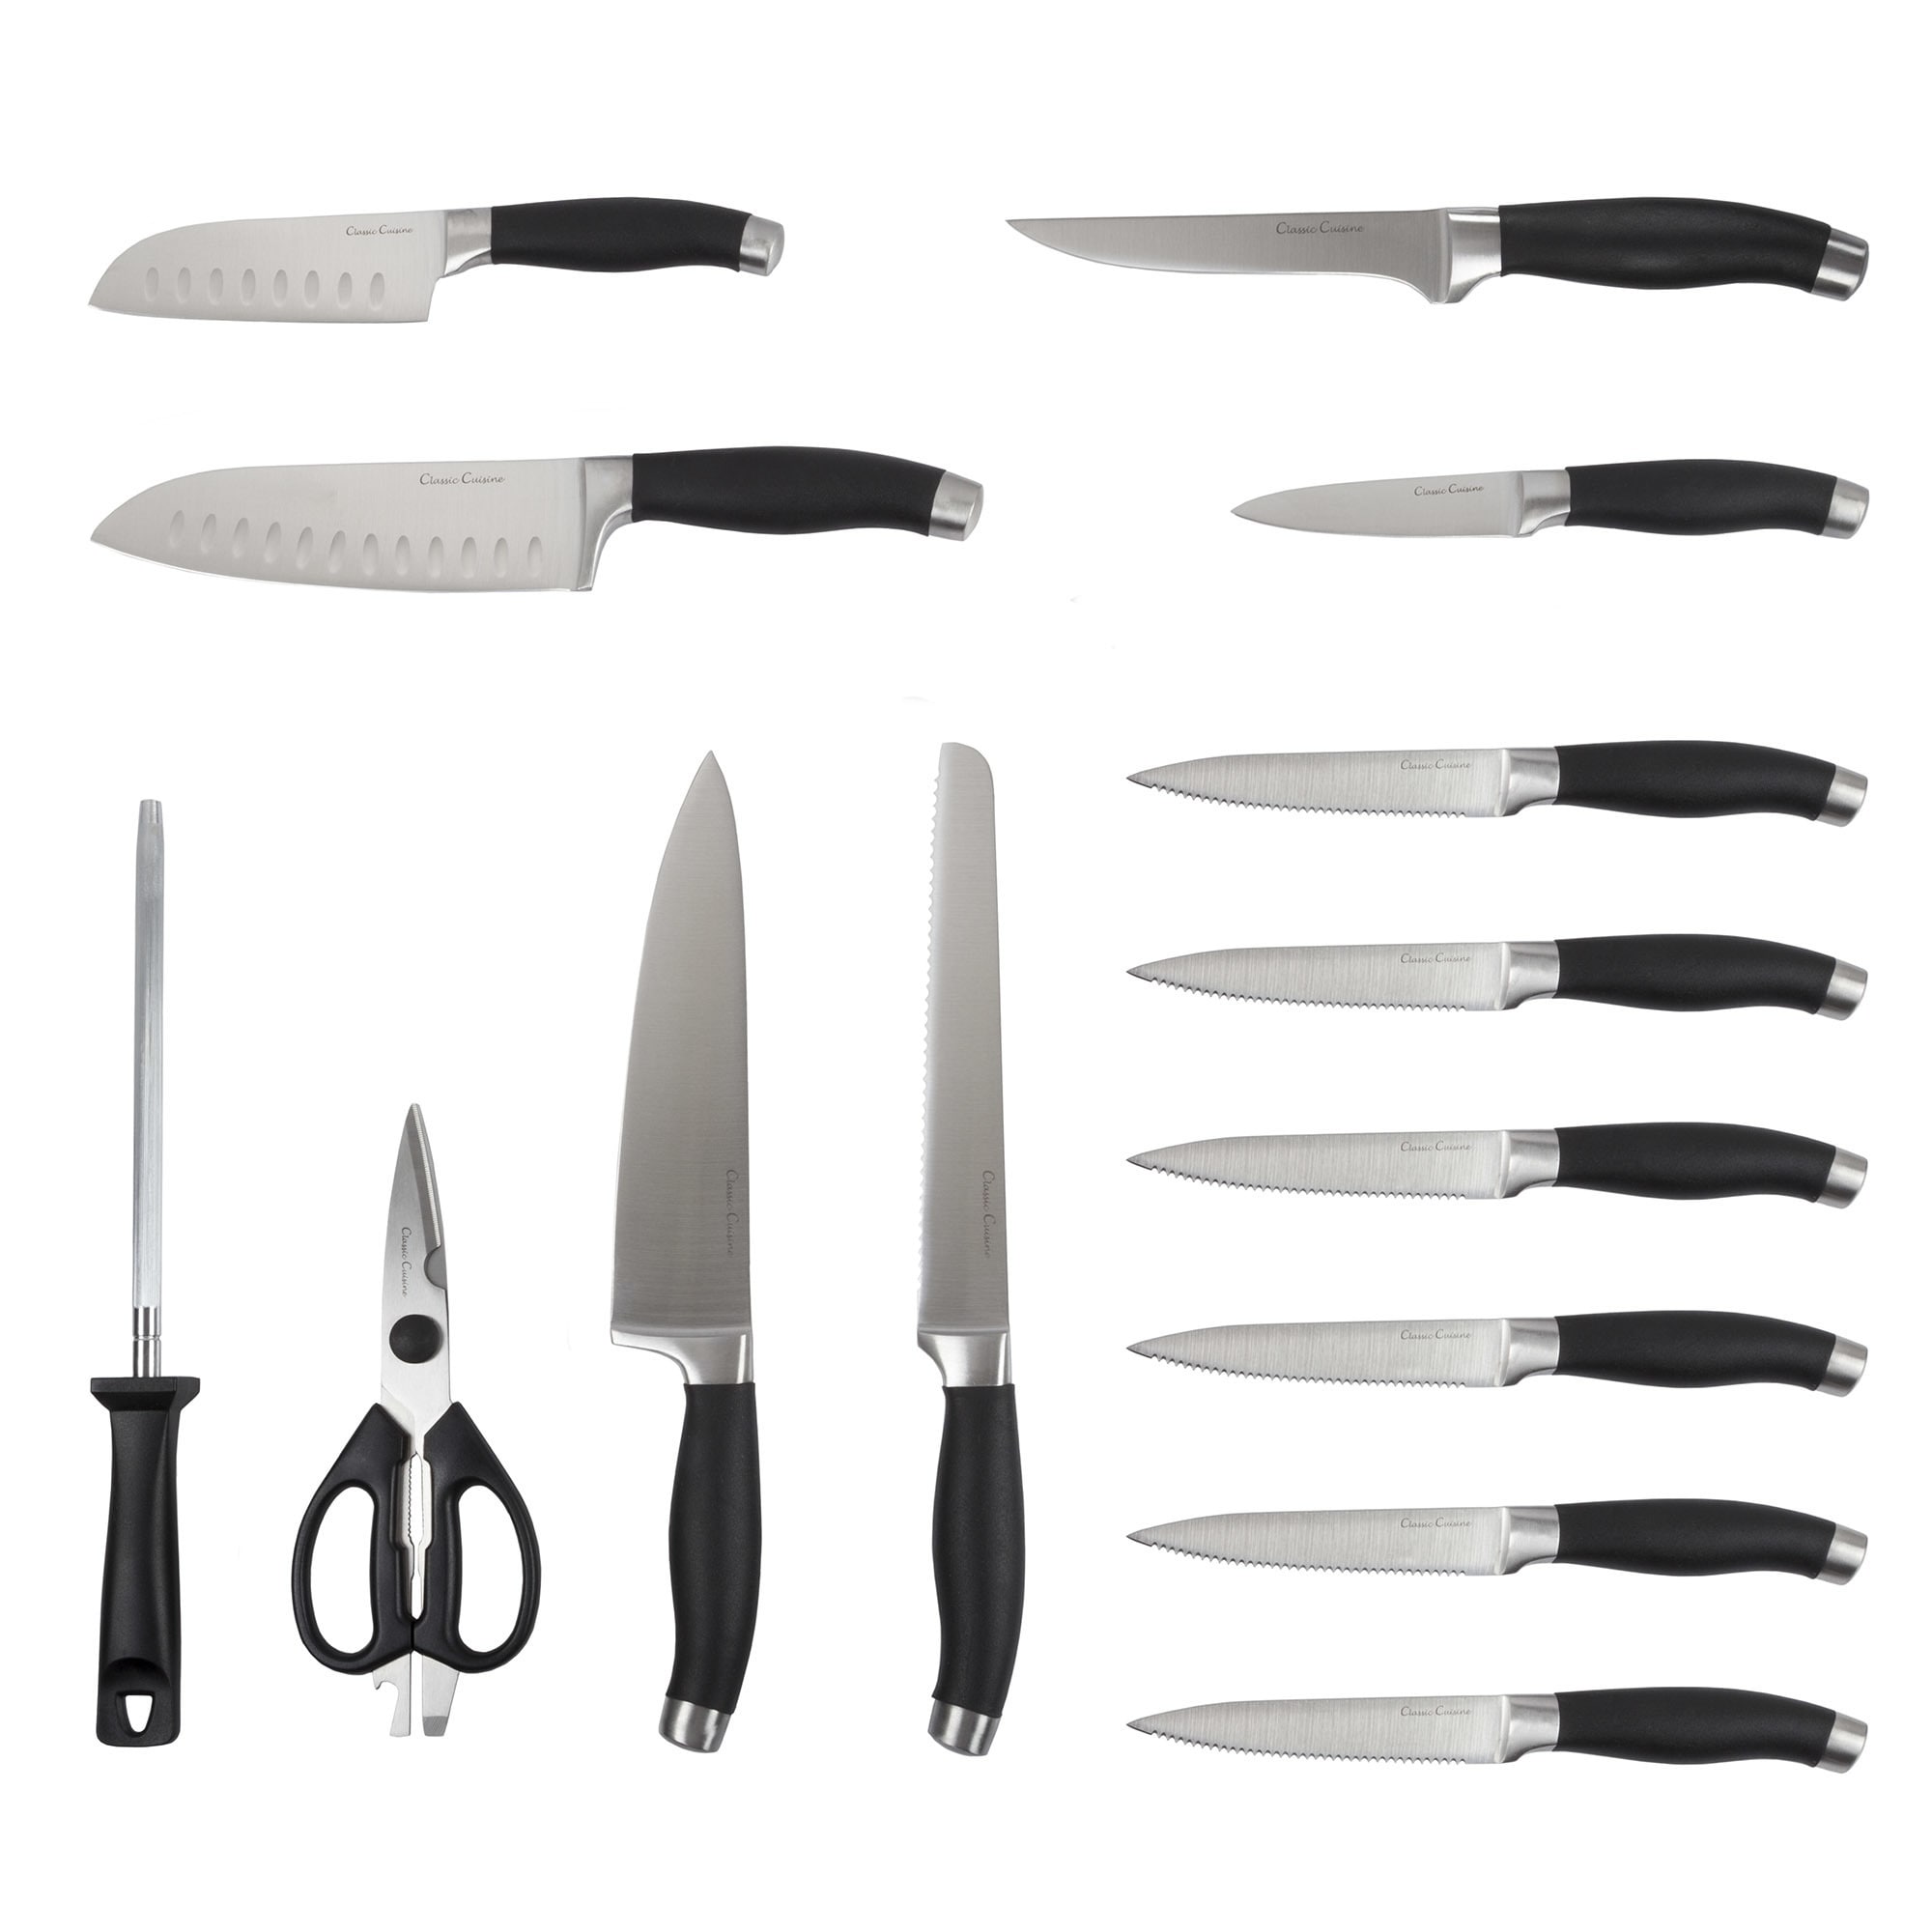 https://ak1.ostkcdn.com/images/products/16804206/Classic-Cuisine-Professional-Quality-15-Piece-Stainless-Knife-Set-a8b7a5a2-aa49-4473-8496-39d24ea6897d.jpg